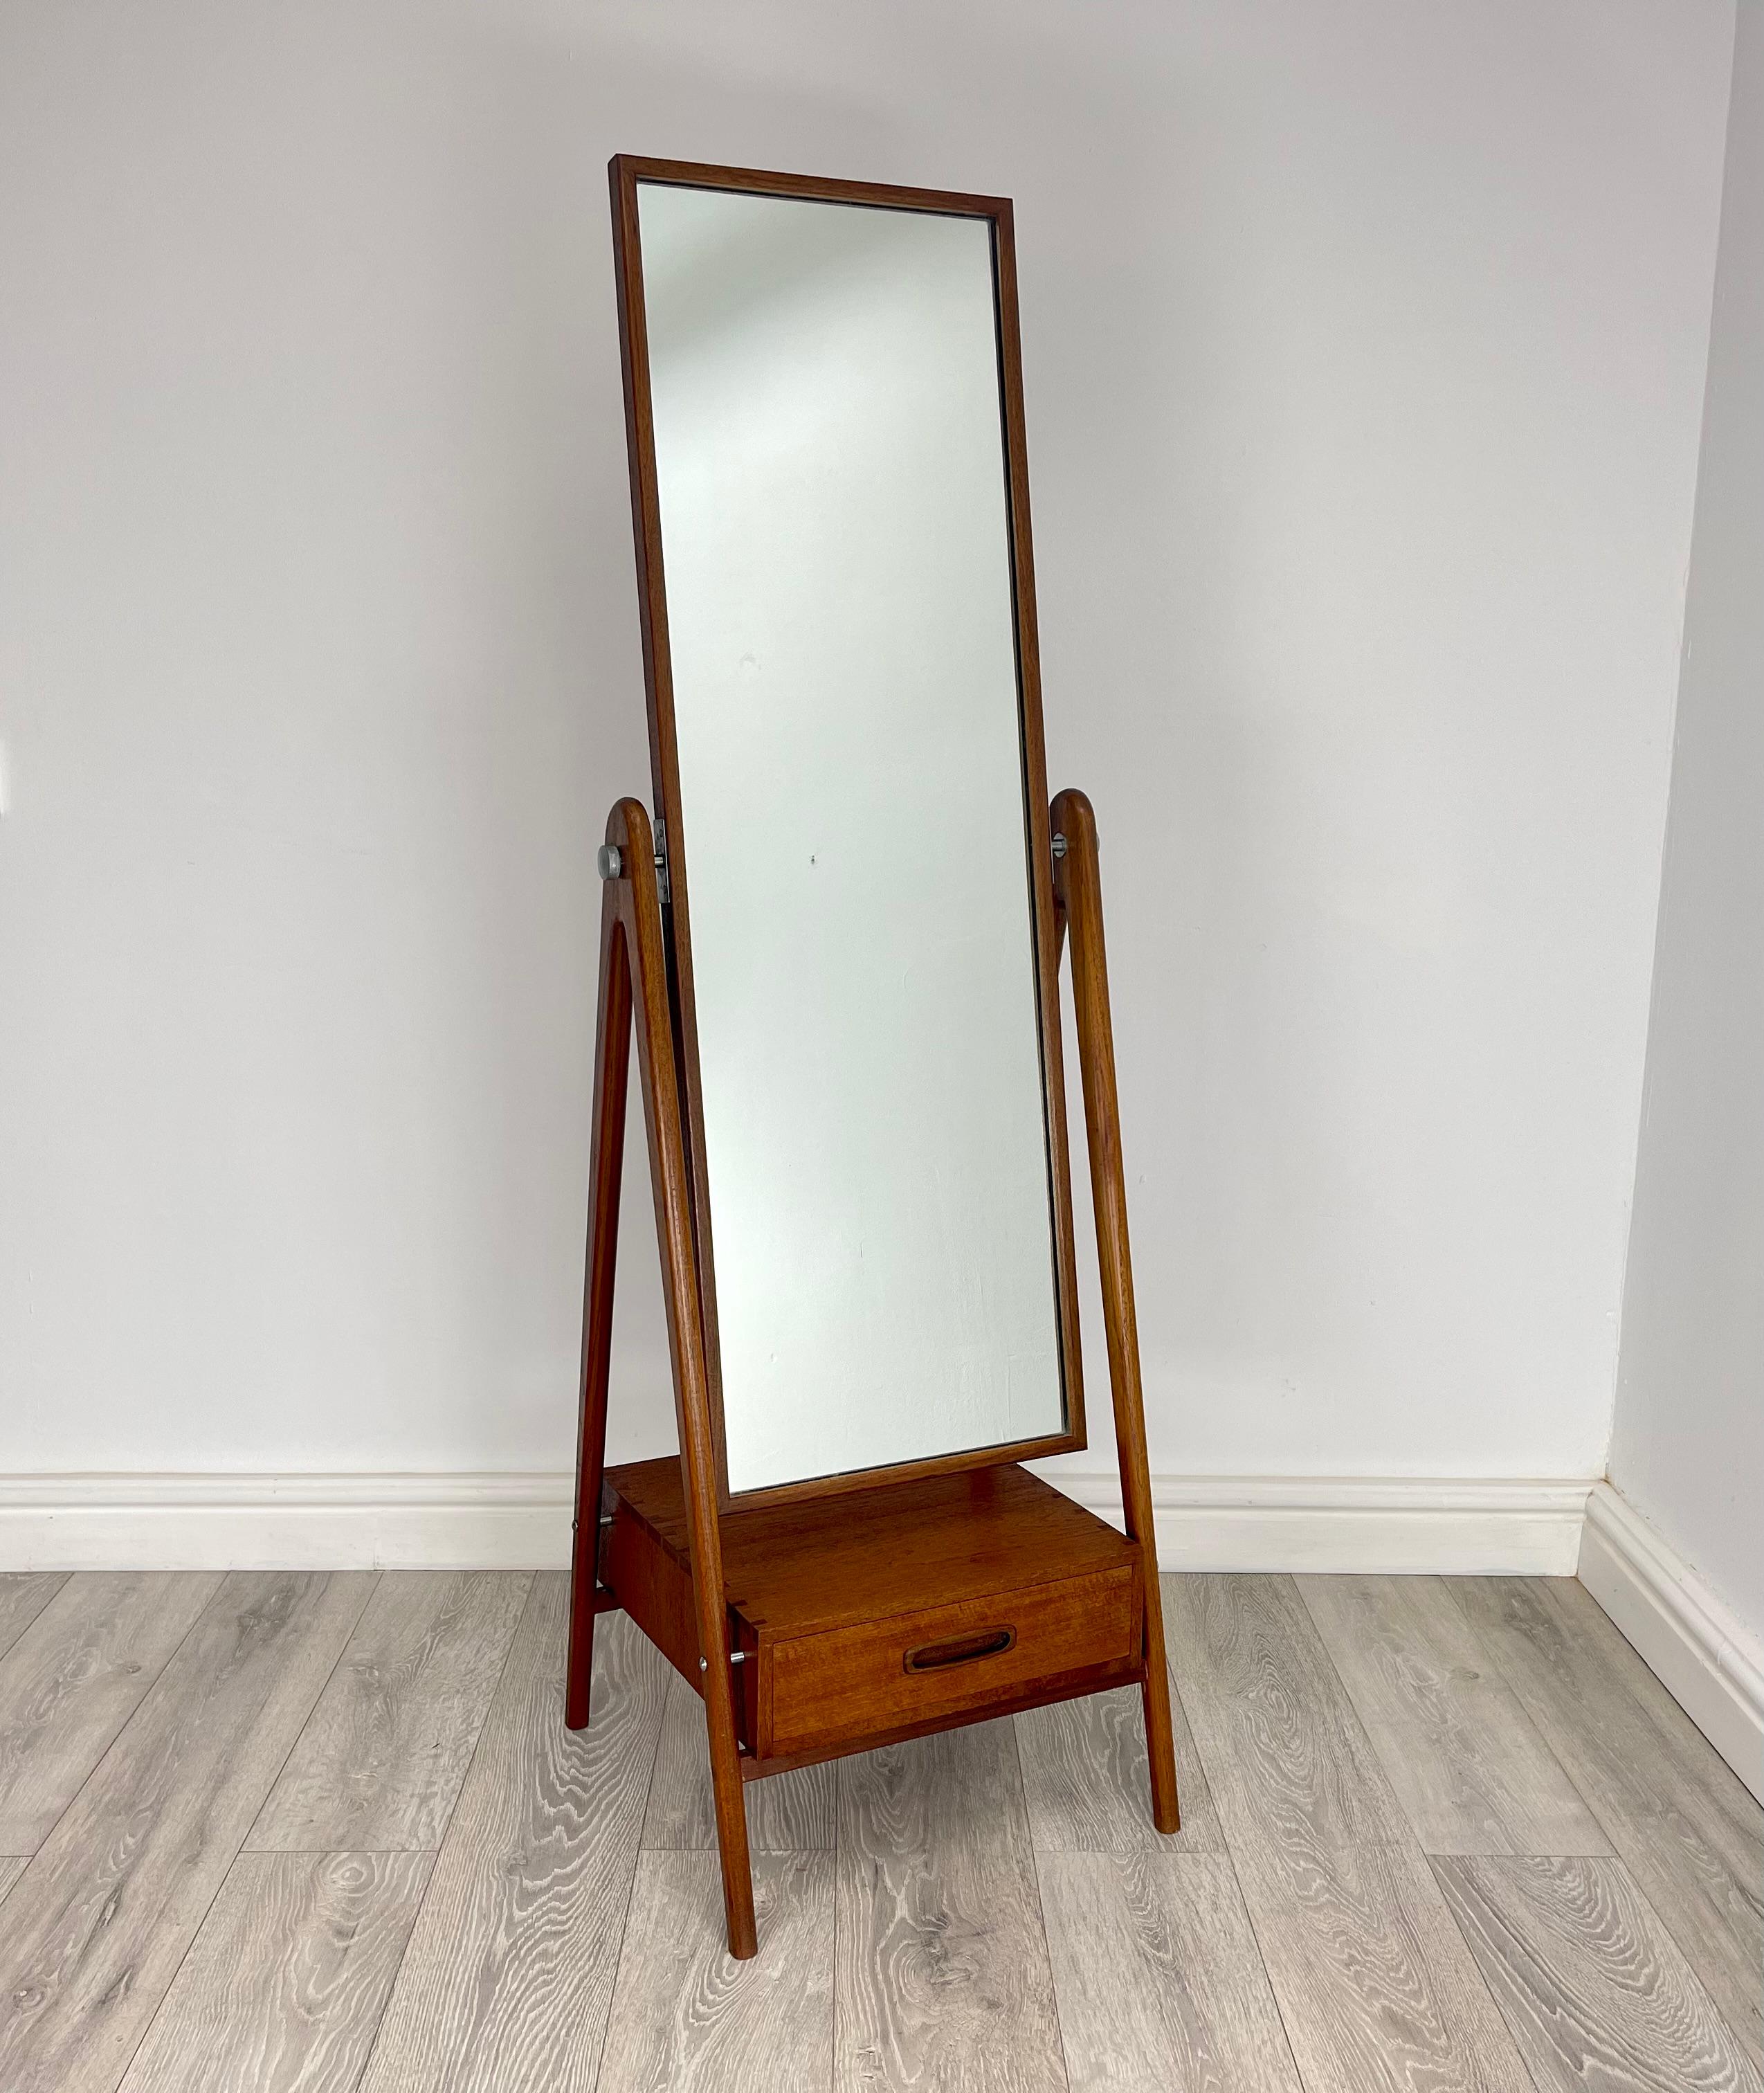 FLOOR MIRROR 
Stunning Midcentury Danish rare teak floor standing  mirror with drawers below  , made from solid teak with dovetail joint to drawer . Stands on elegant v shaped frame , mirror can be fully tilted great quality piece of